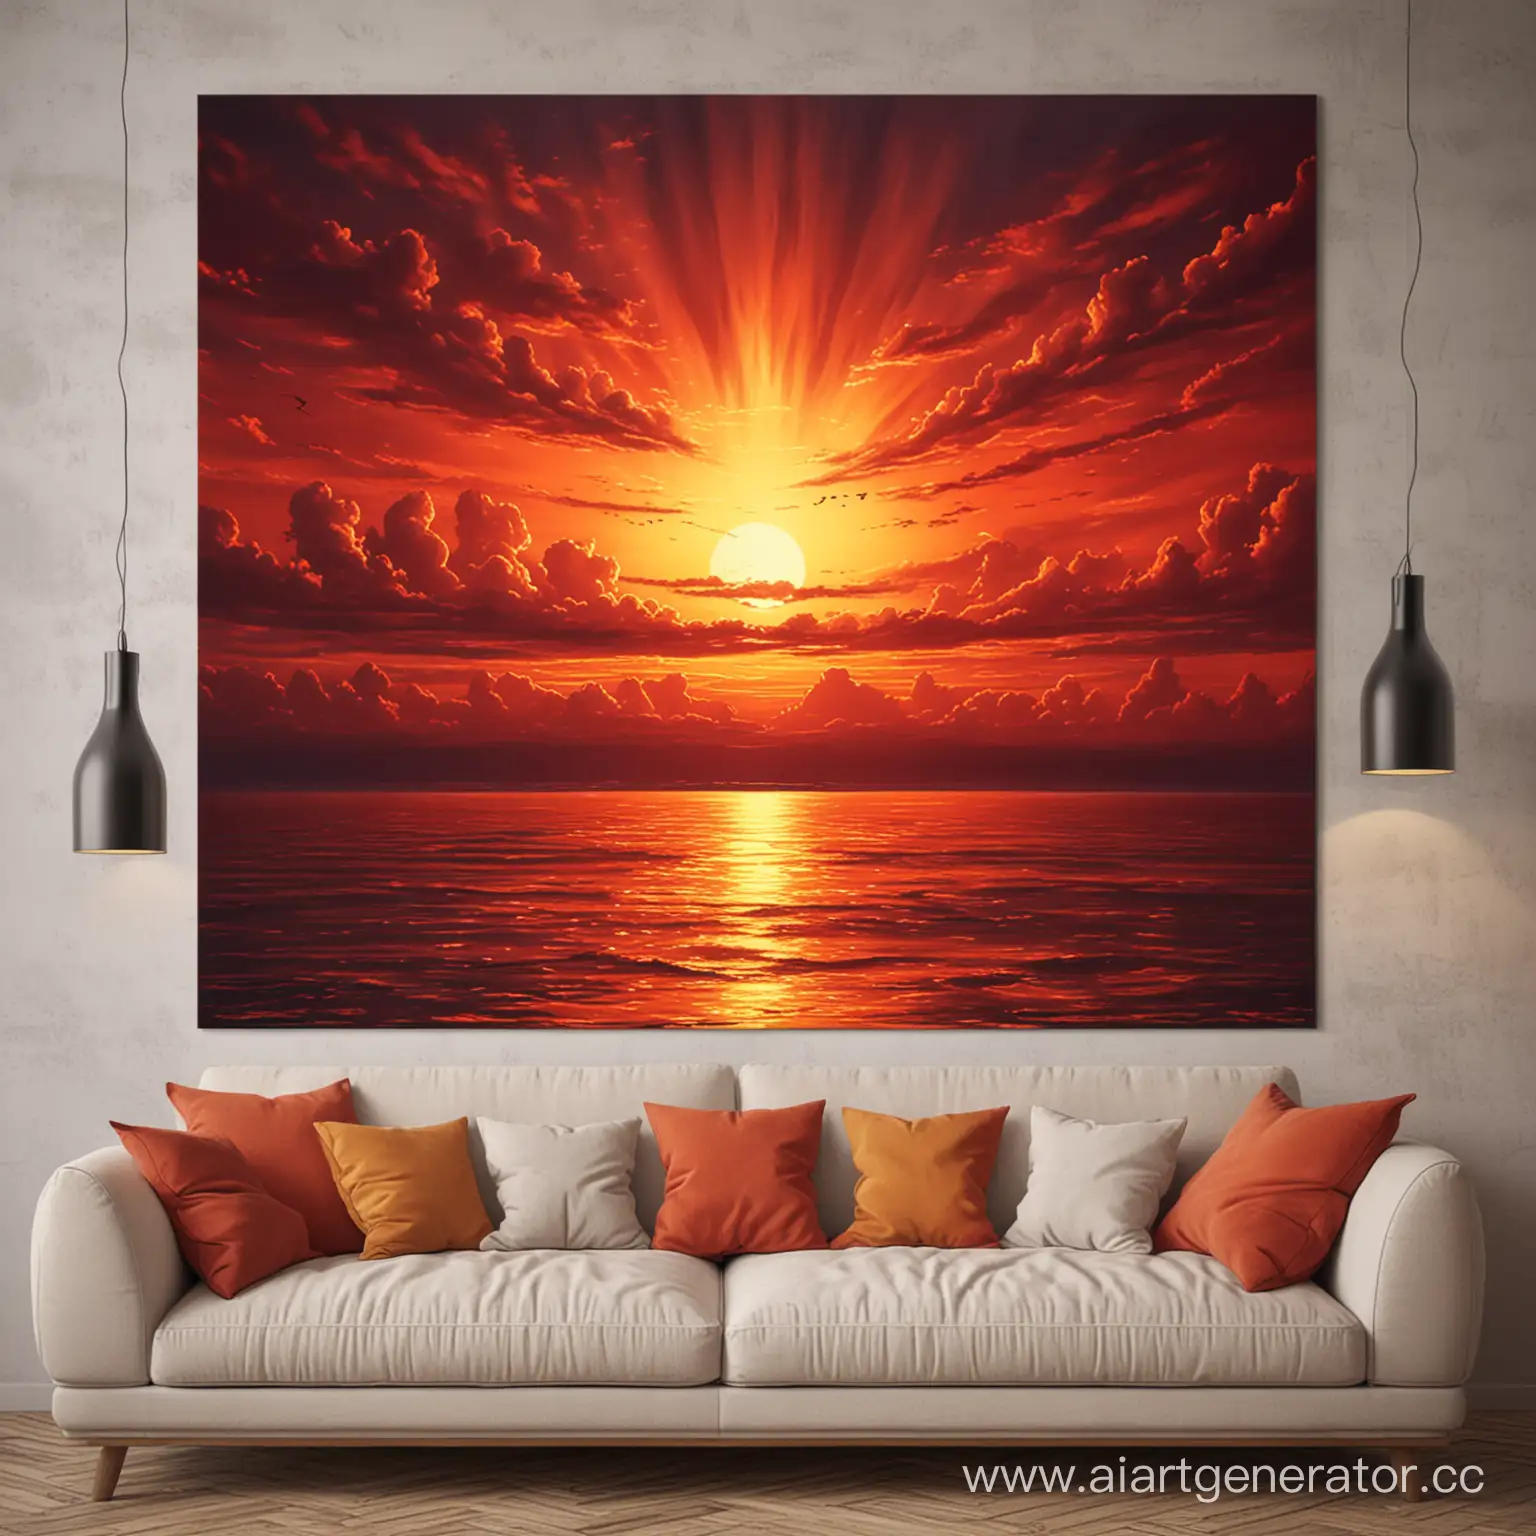 Vibrant-Red-Fiery-Sunset-Painting-with-Silhouetted-Landscape